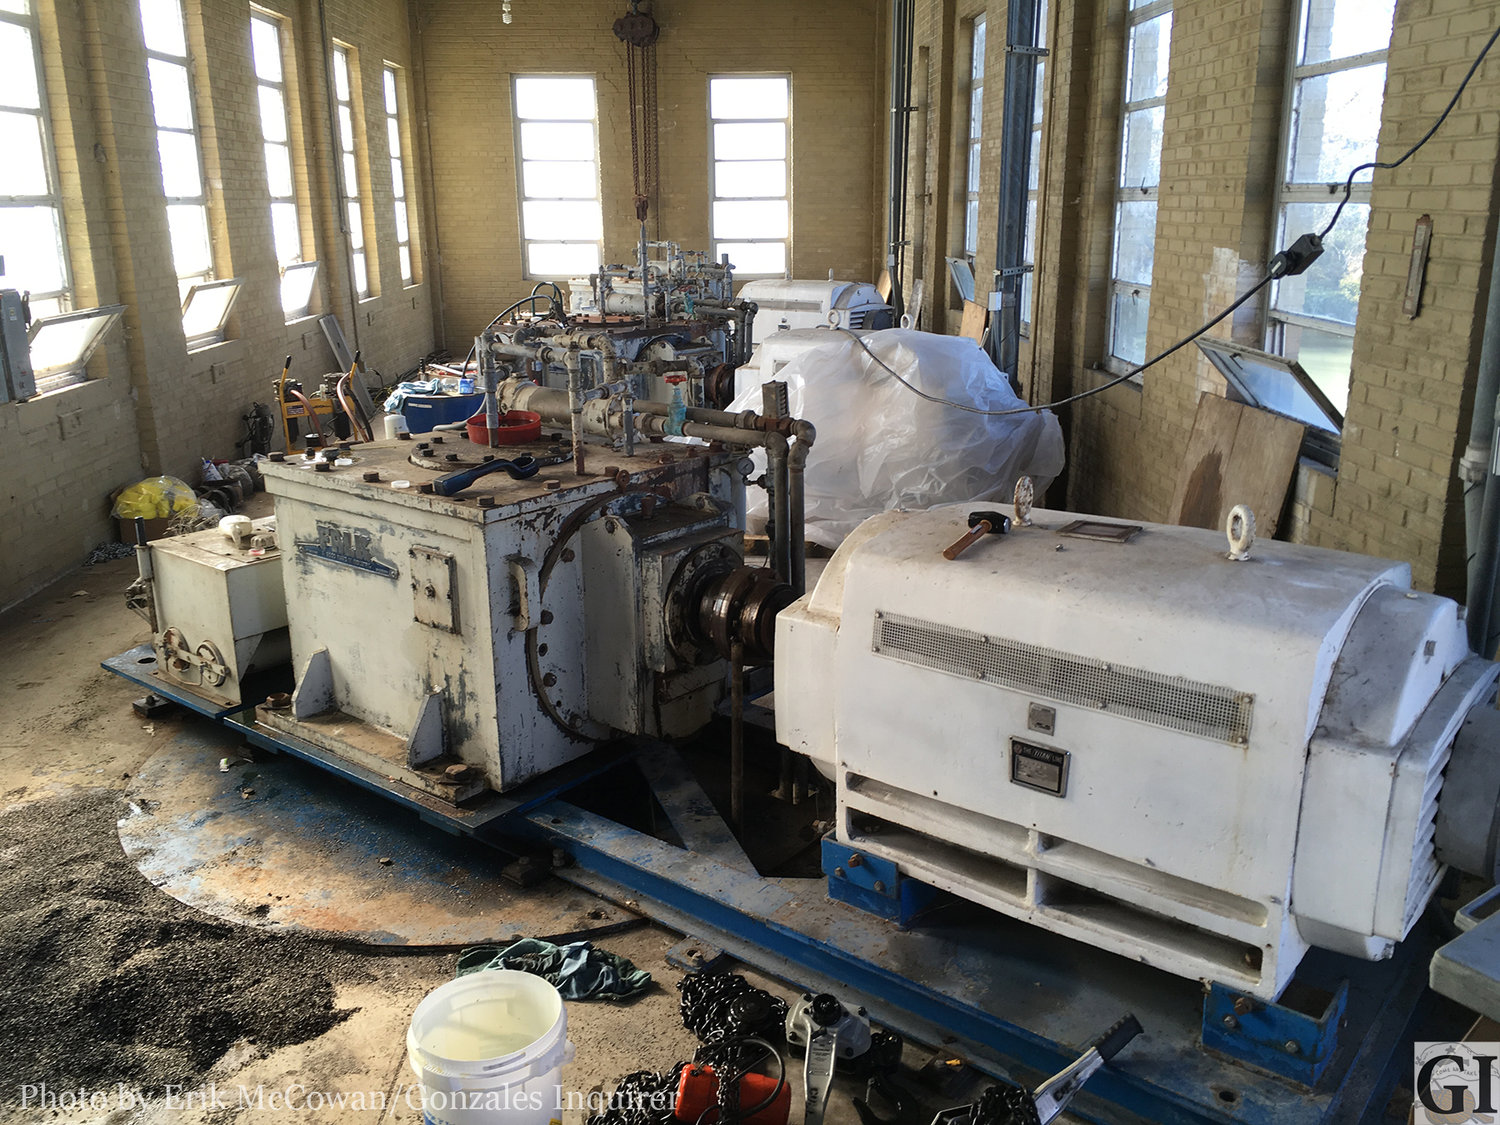 The main house at the dam holds three identical electrical generating units that will be removed and shipped to Georgia for repairs. The large box to the left is the gear box, and the electric generators sit to the right.